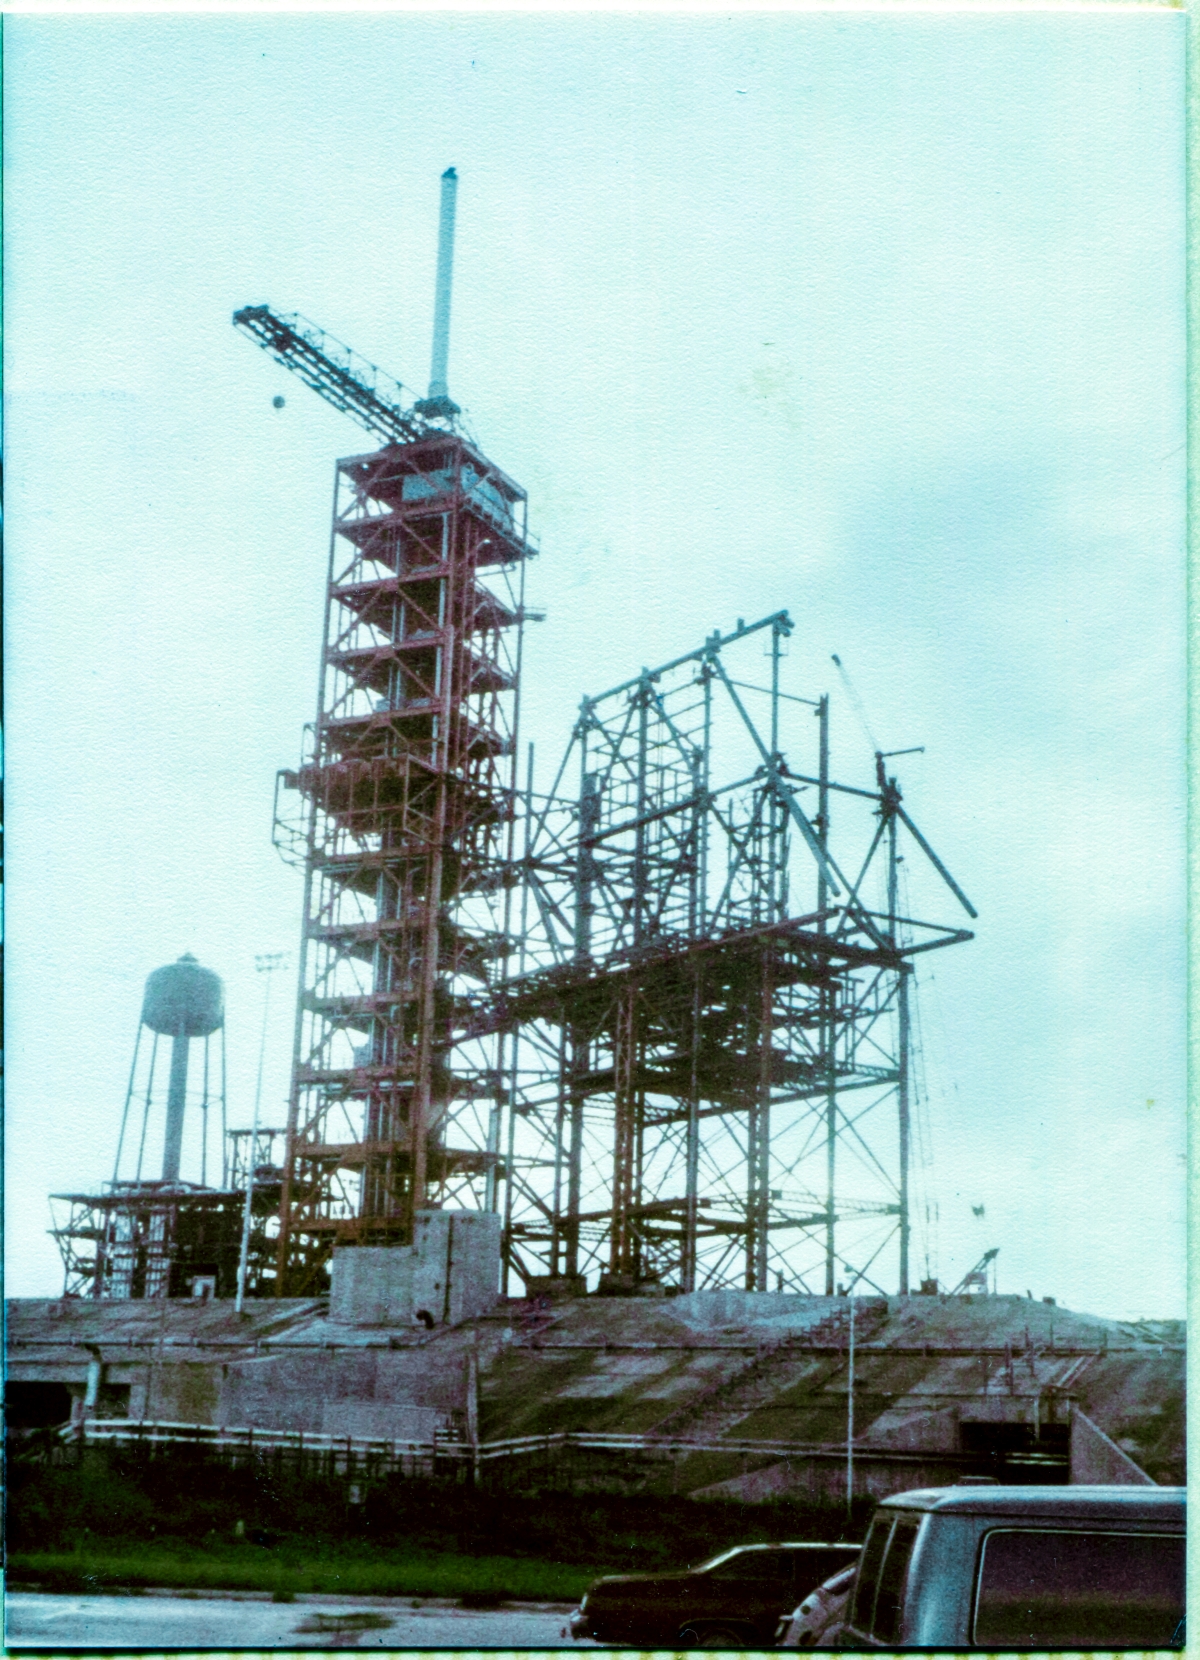 Image 003. Viewed from the parking lot just in front of the Sheffield Steel field trailer in the summer of 1980, the the incomplete steel skeleton of the Rotating Service Structure at Space Shuttle Launch Complex 39-B, Kennedy Space Center, Florida, stands supported on its temporary falsework support framing, growing into the sky, as it is assembled by the Union Ironworkers of Local 808, working for Wilhoit Steel Erectors. To its immediate left, stands the taller red framework of the Fixed Service Structure, topped by the Hammerhead Crane, and the Lightning Mast above that. Photo by James MacLaren.